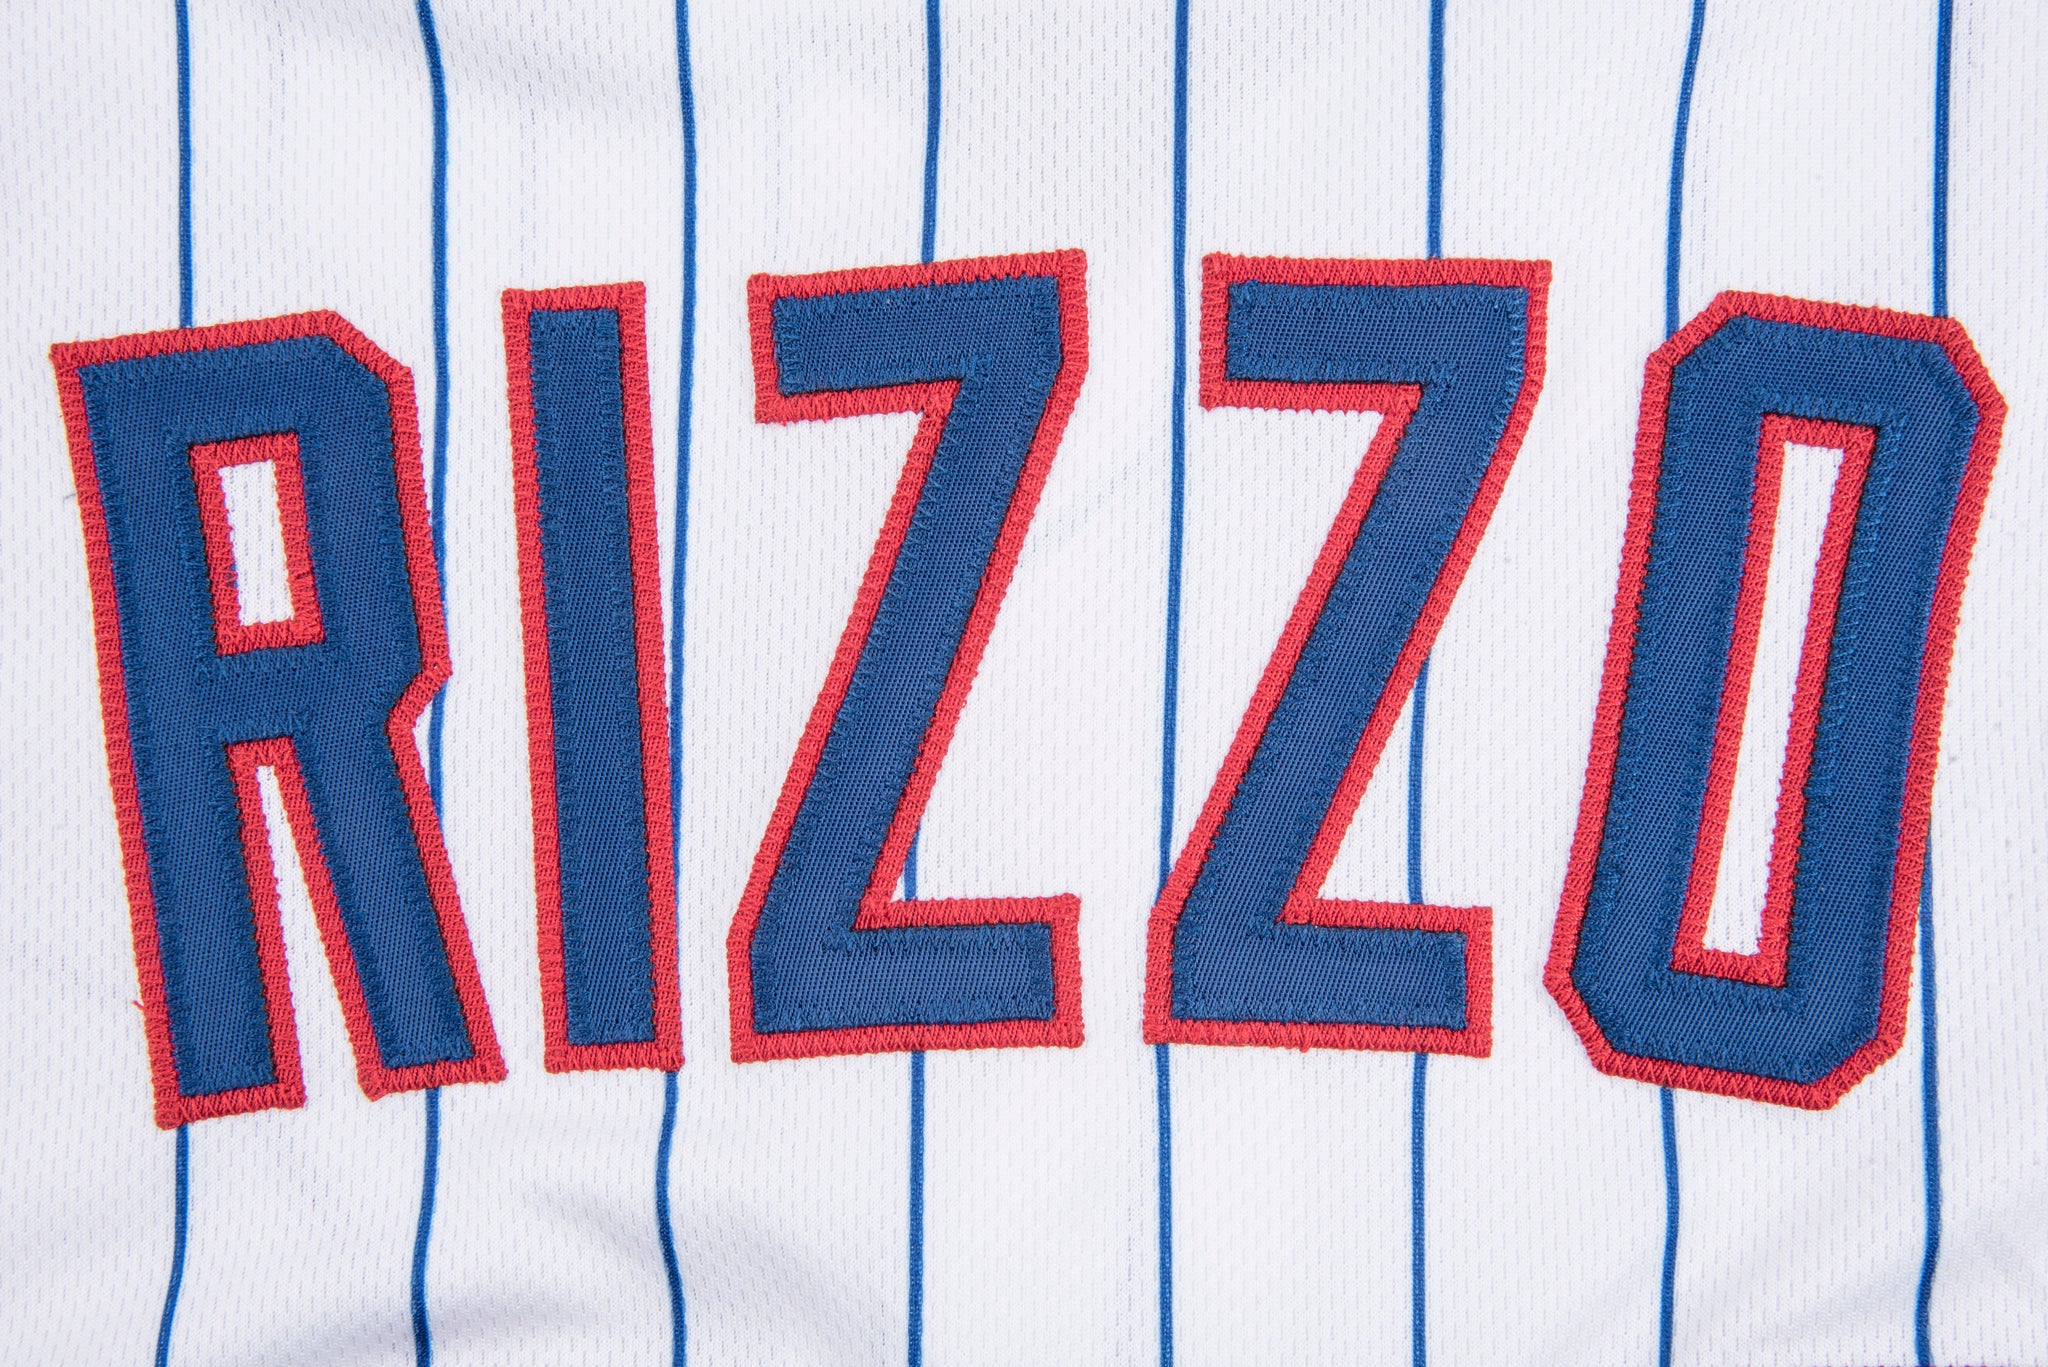 rizzo jersey cubs